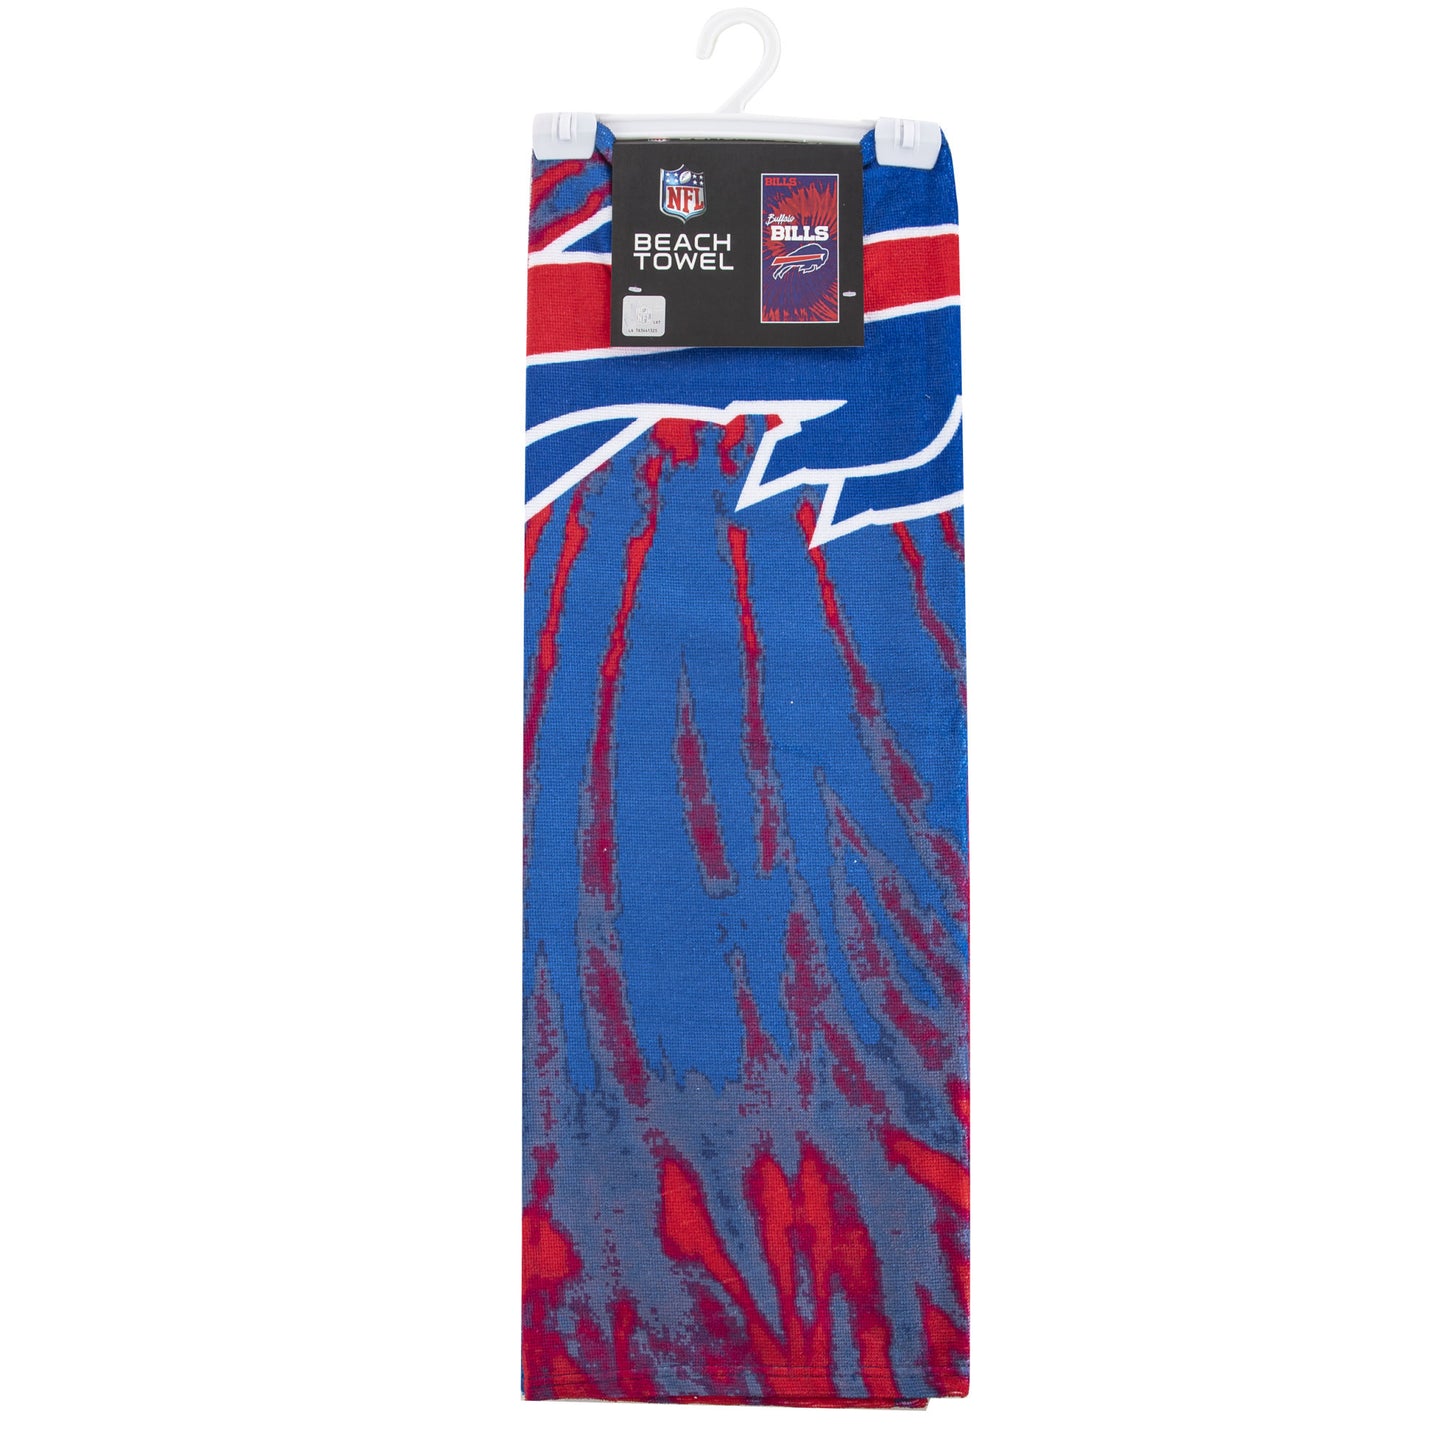 Bills OFFICIAL NFL "Psychedelic" Beach Towel; 30" x 60"